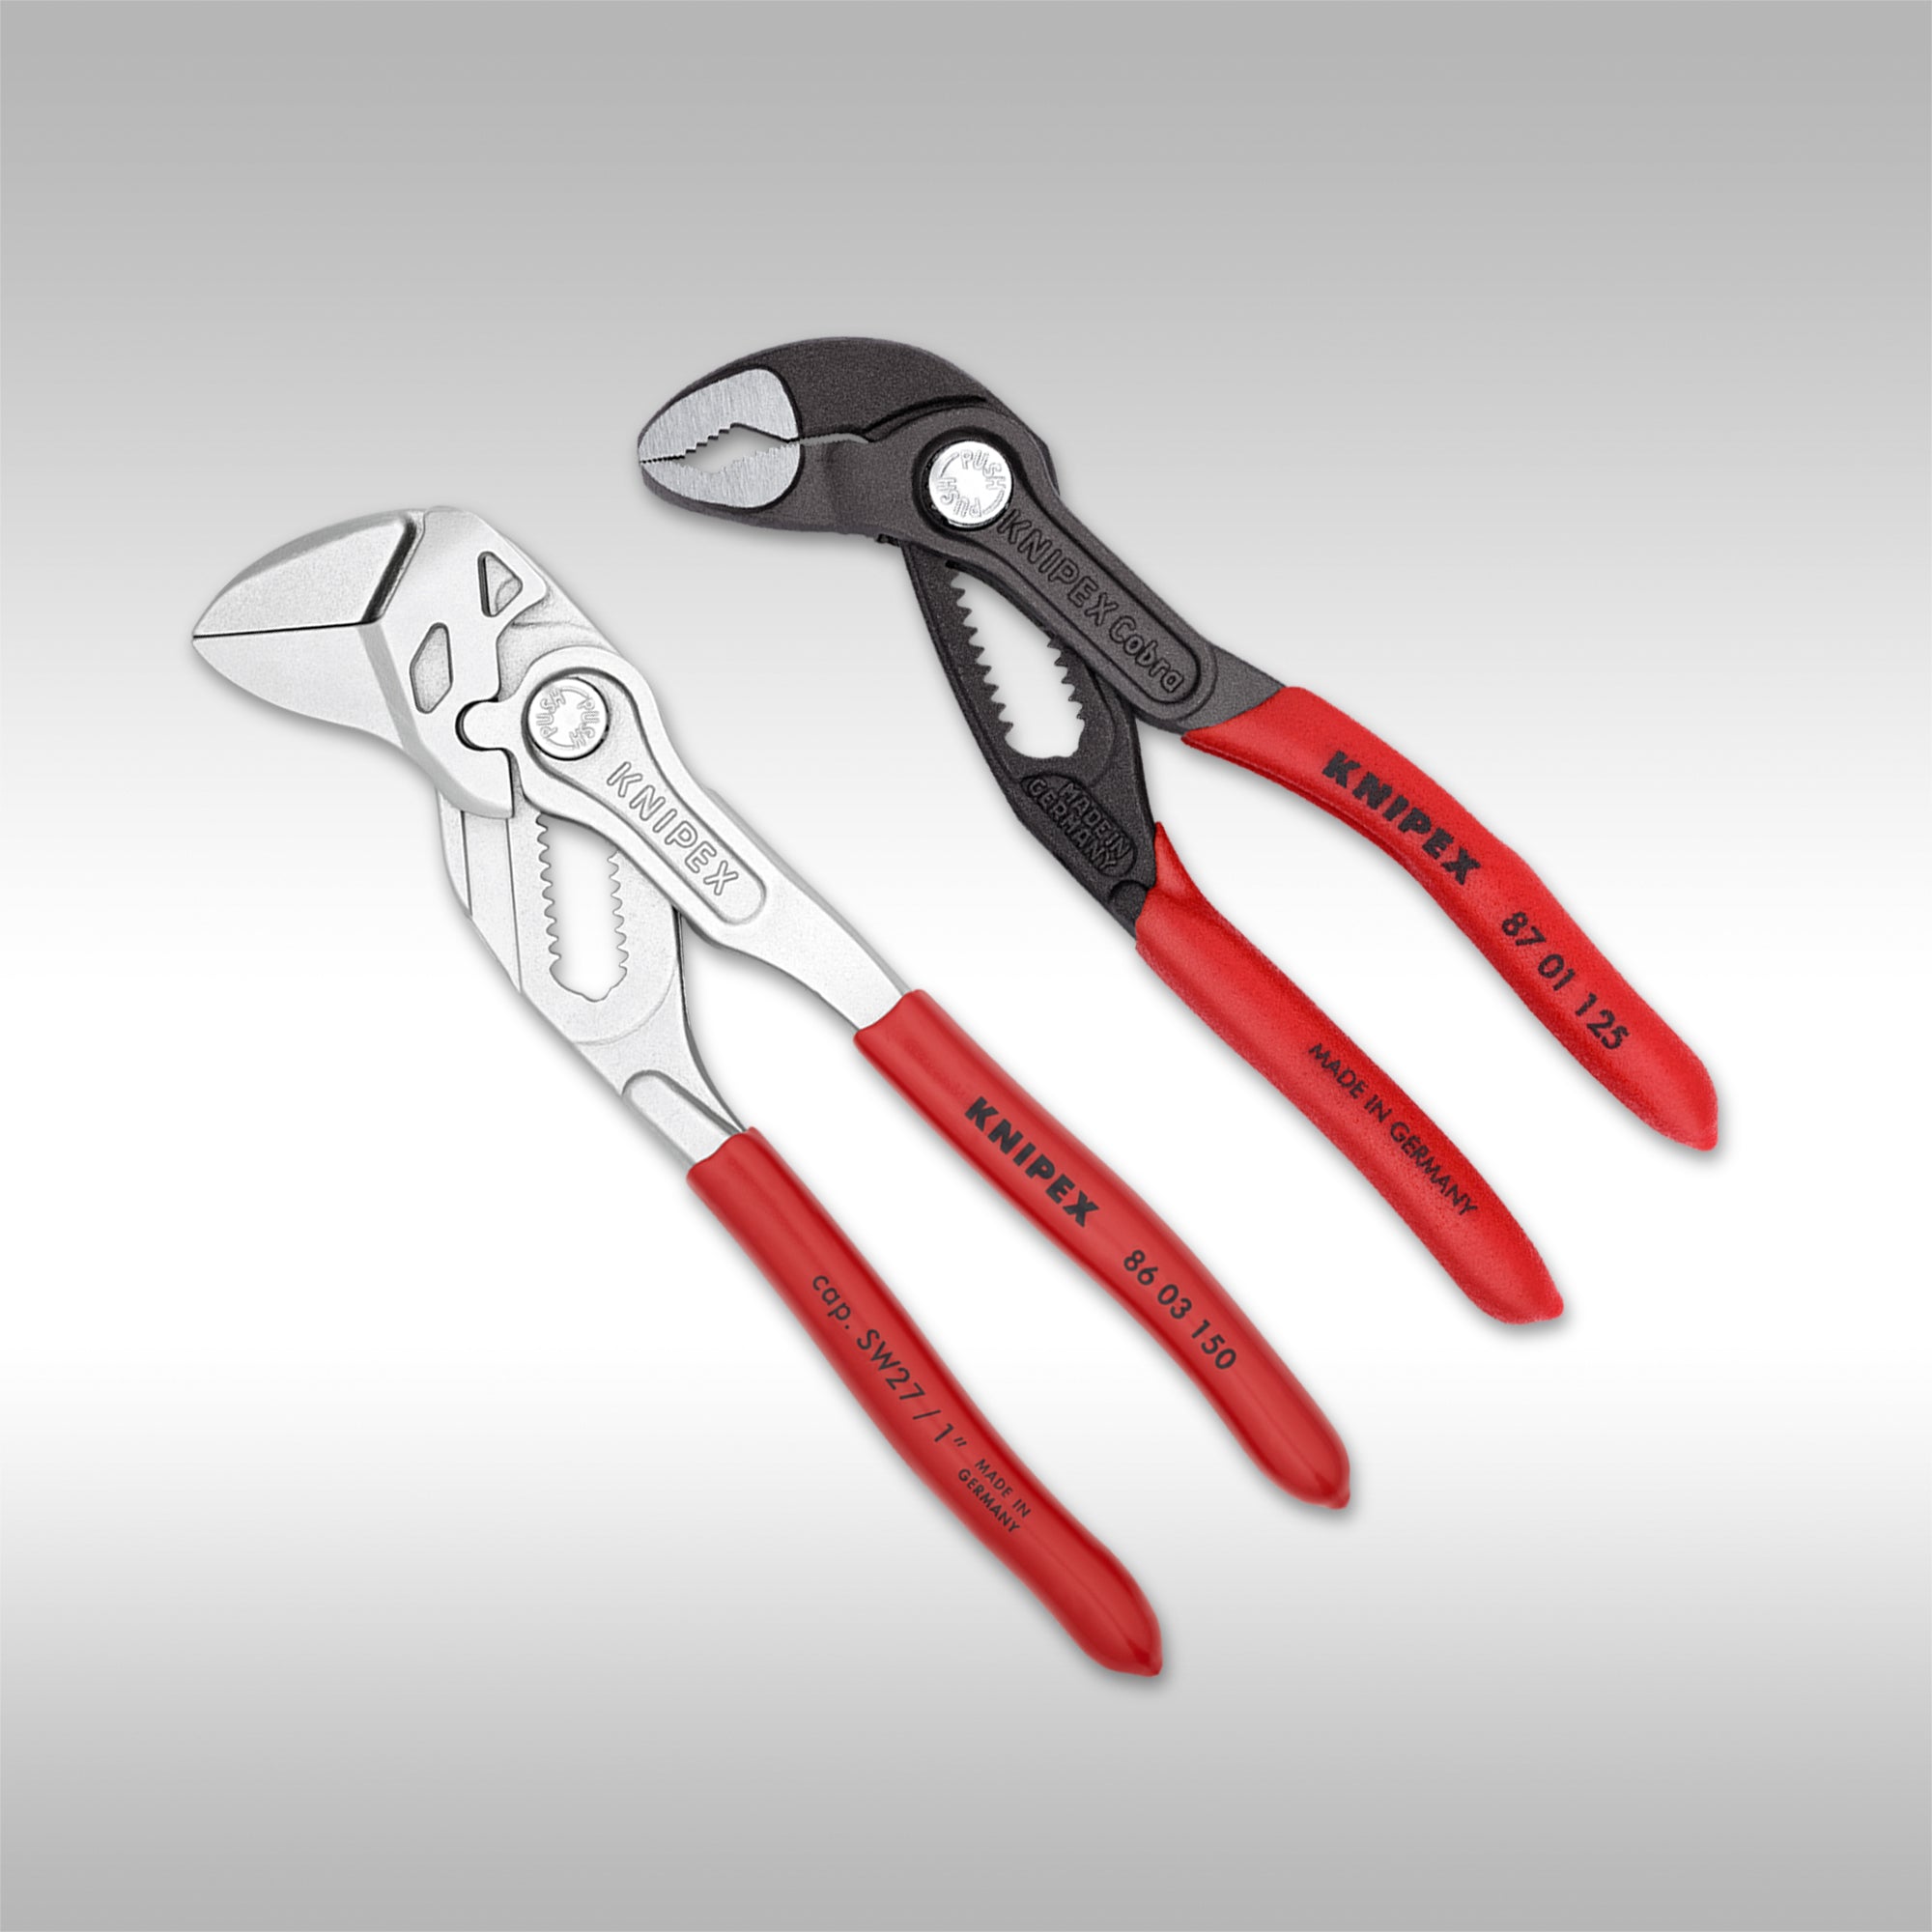 KNIPEX - 2 PIECE MINI PLIERS IN BELT POUCH - 6" PLIERS WRENCH & 5" COBRA